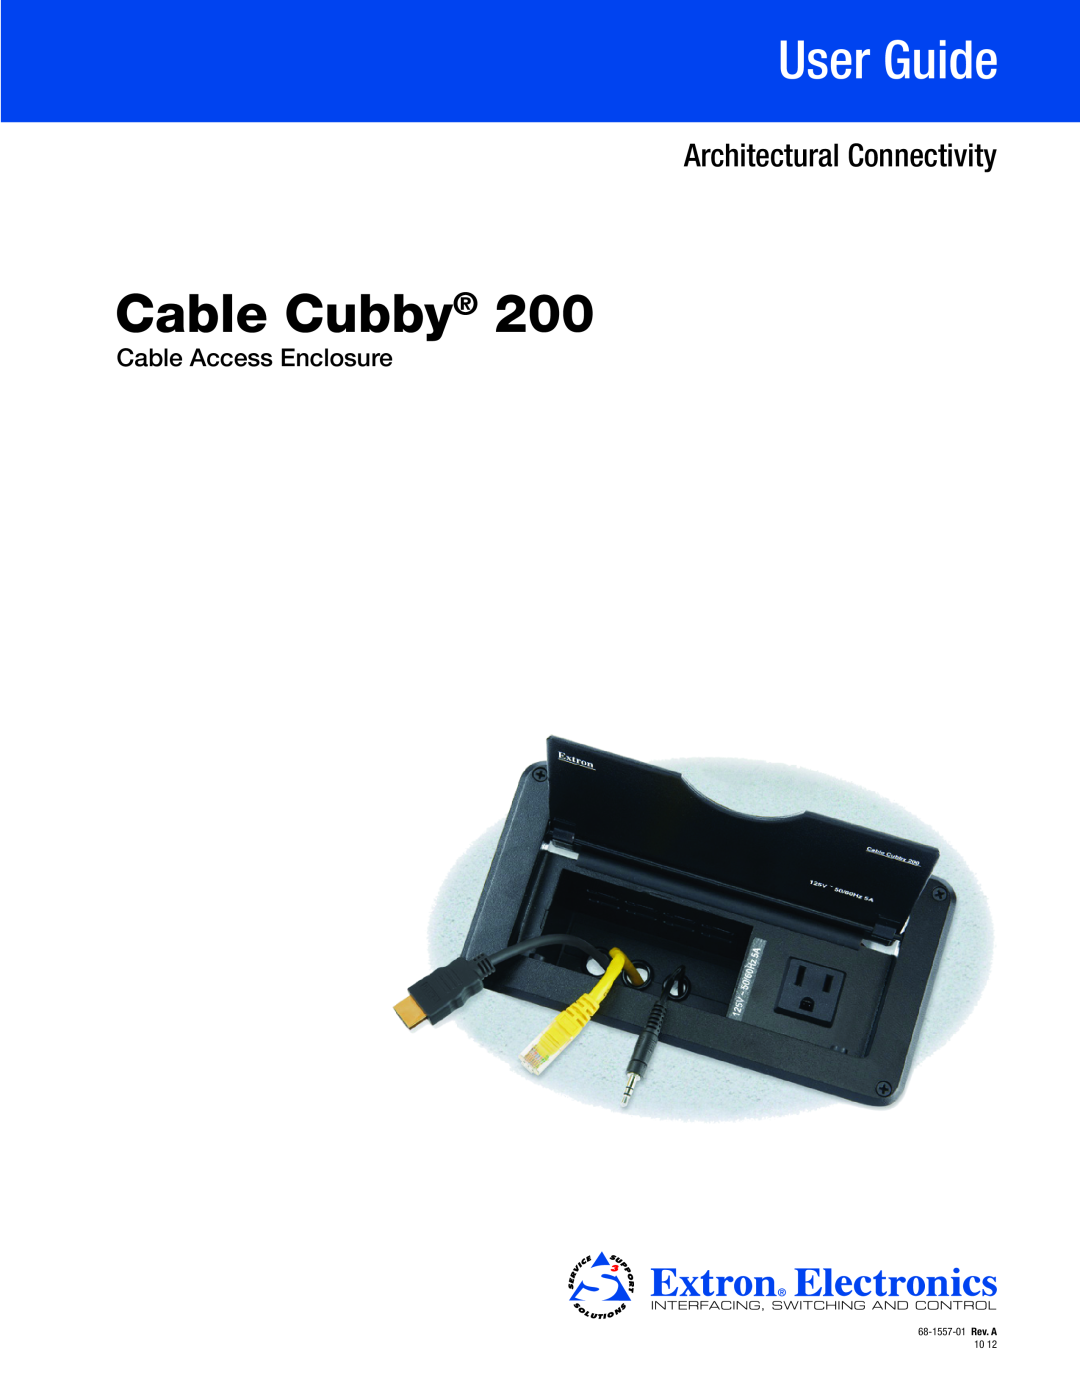 Extron electronic 200 manual Cable Cubby, User Guide, Architectural Connectivity, Cable Access Enclosure 